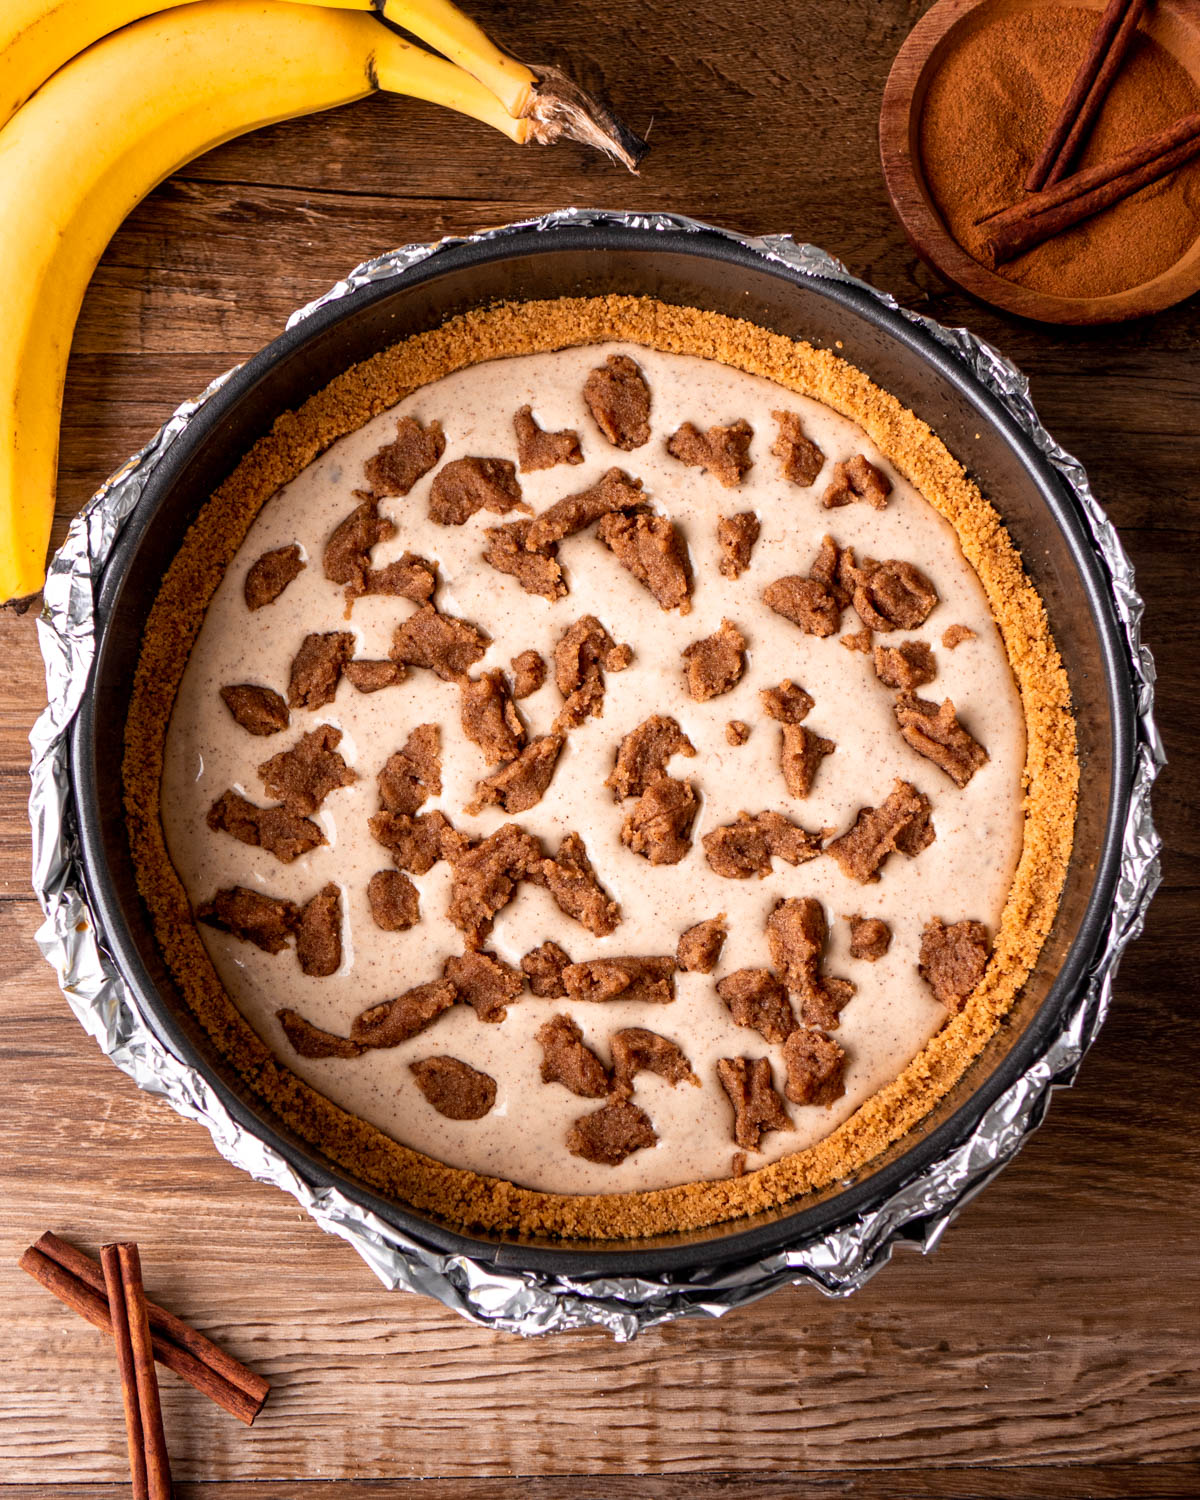 ⅓ of cheesecake batter poured into pan with ⅓ of cinnamon sugar filling sprinkled over top